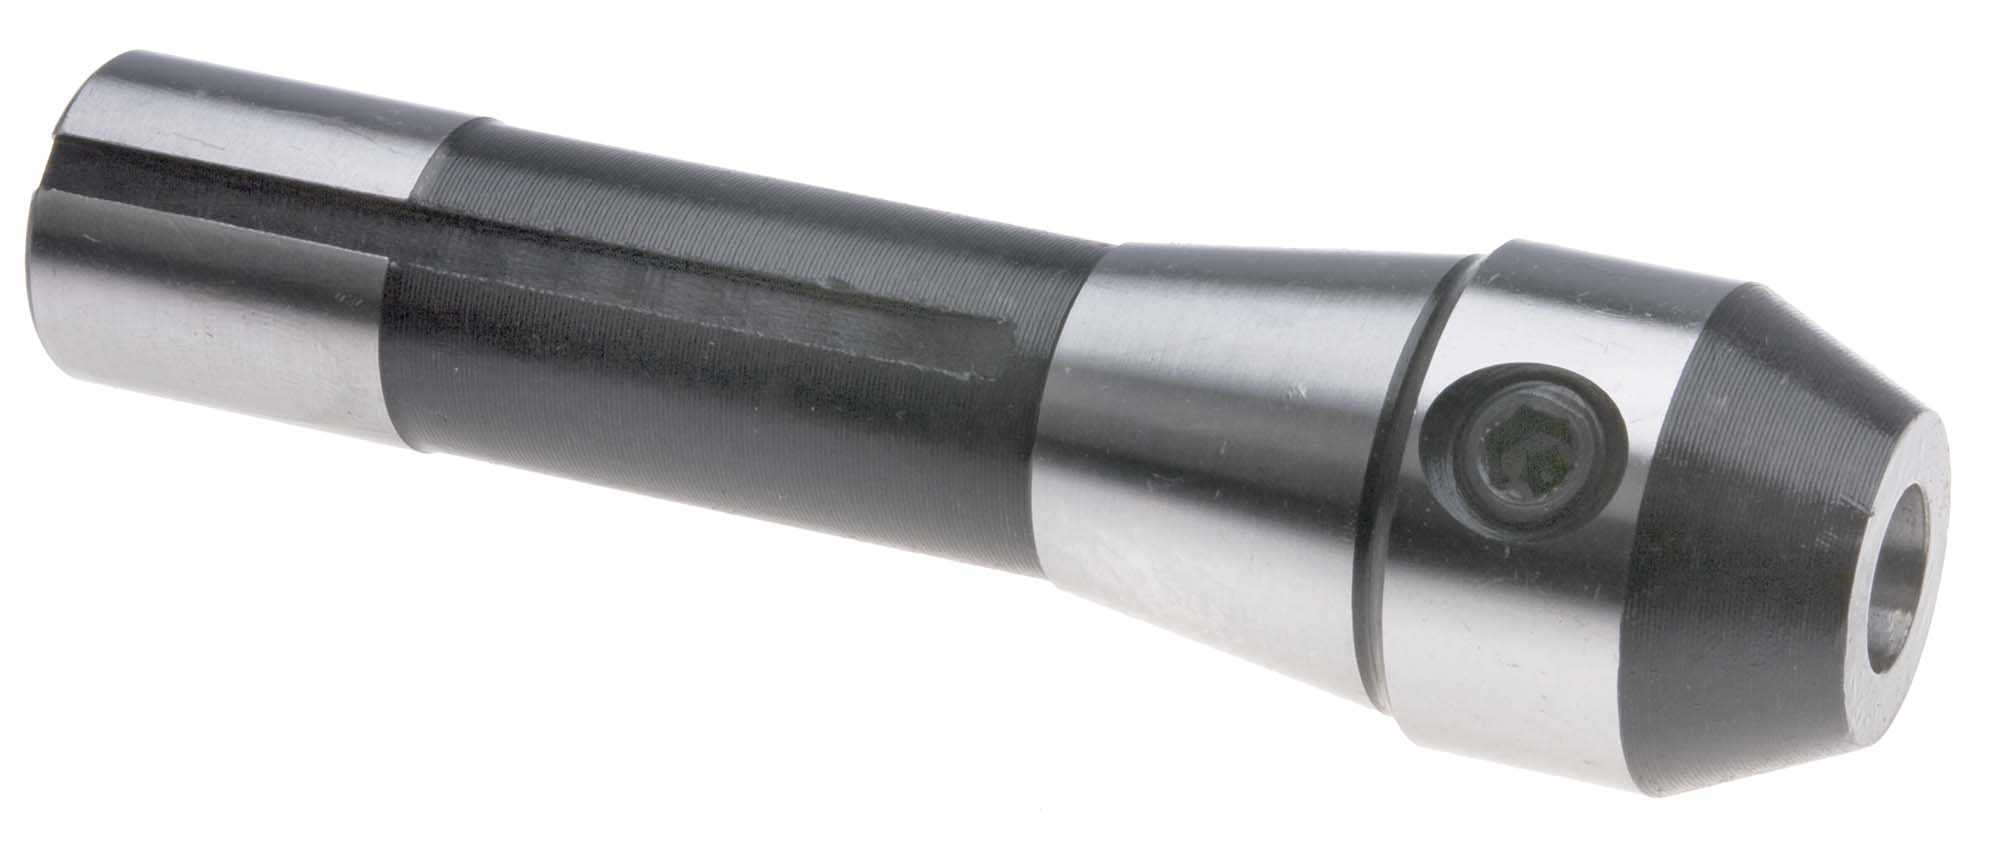 1-1/4" R8 End Mill Adapter